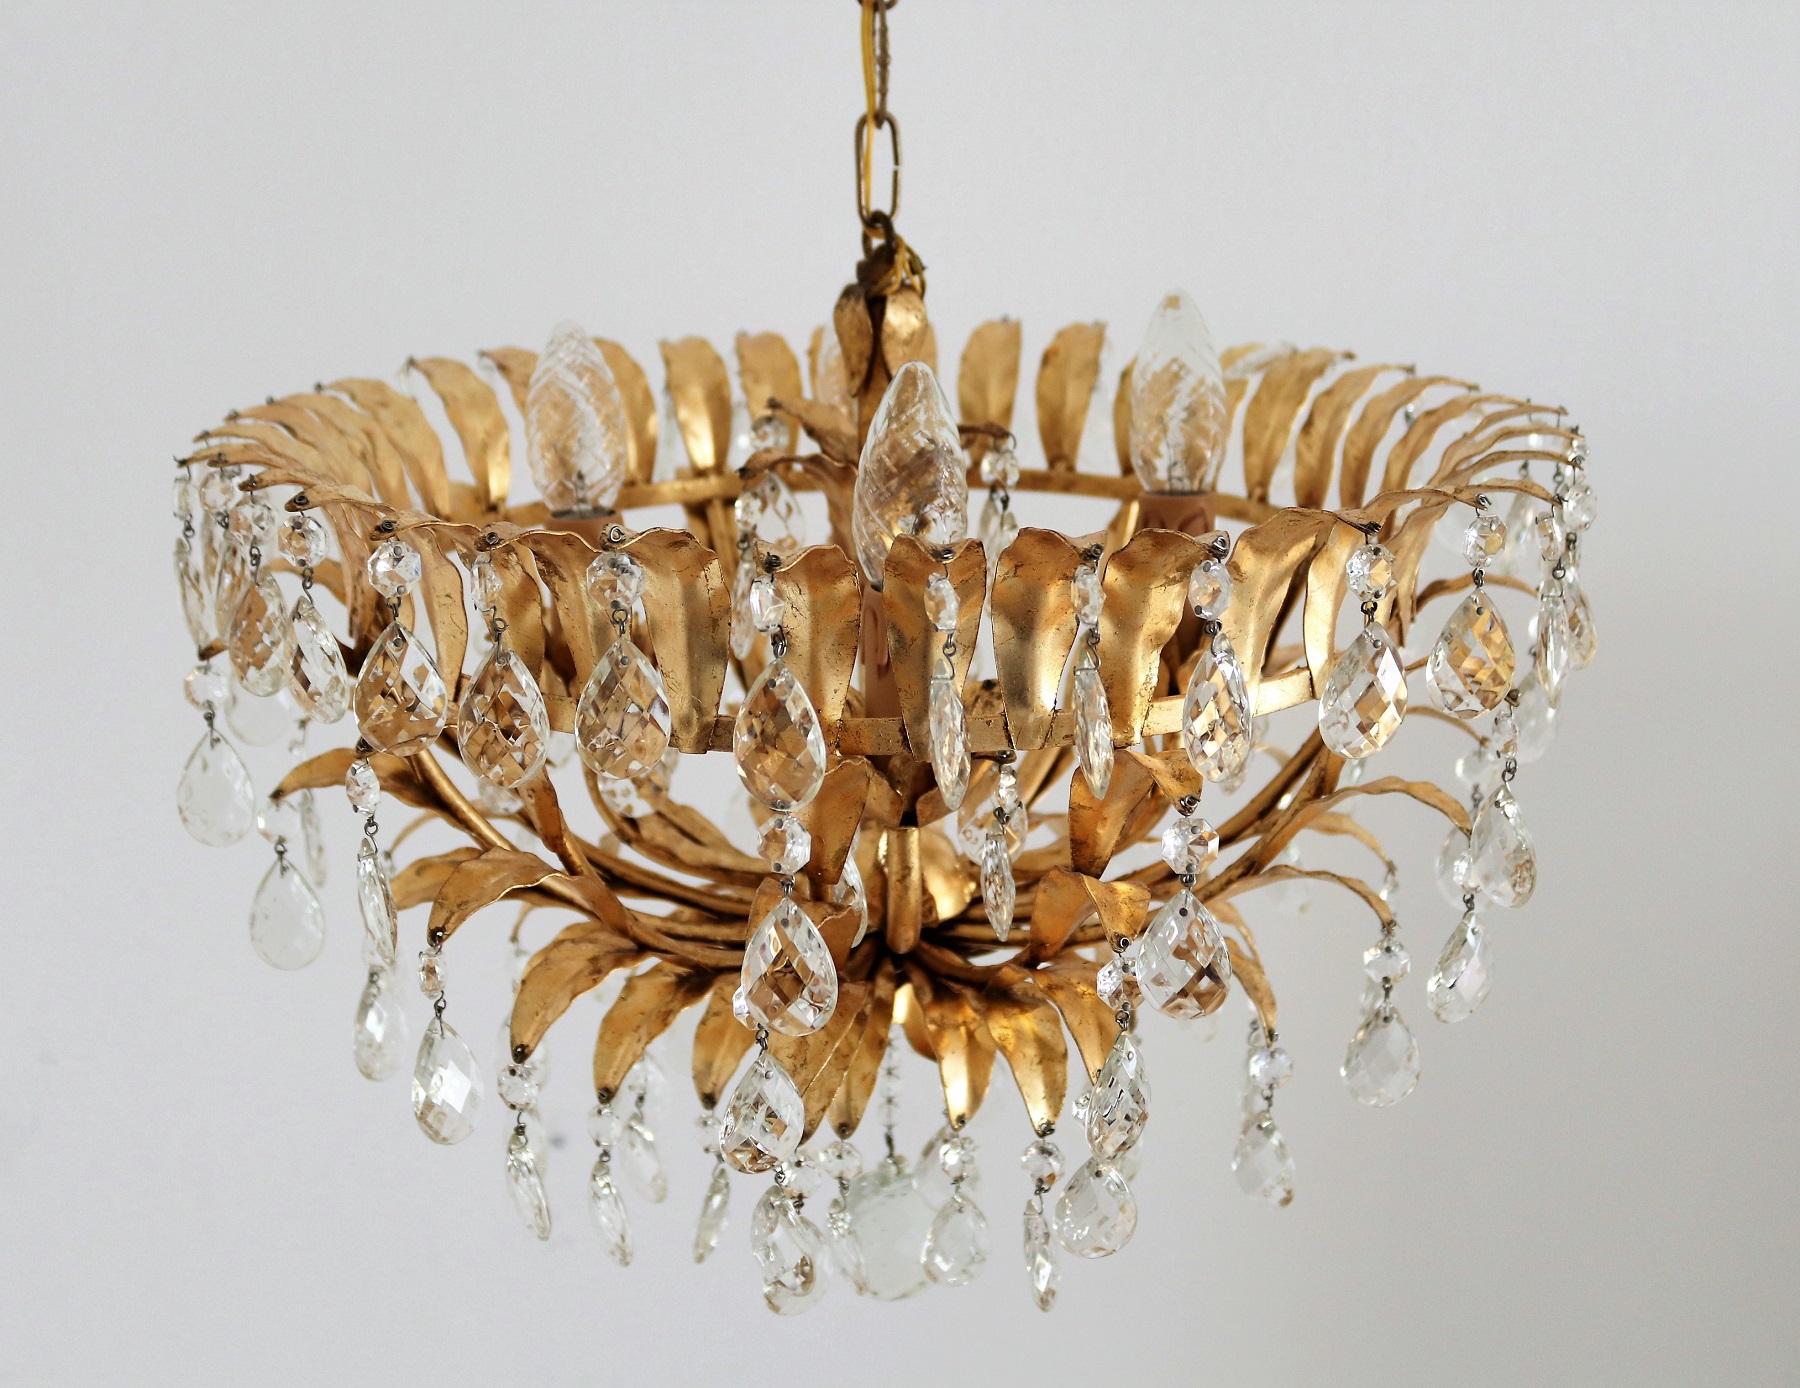 Italian Midcentury Gilt Crystal Flush Mount Chandelier with Leafes by Banci  7